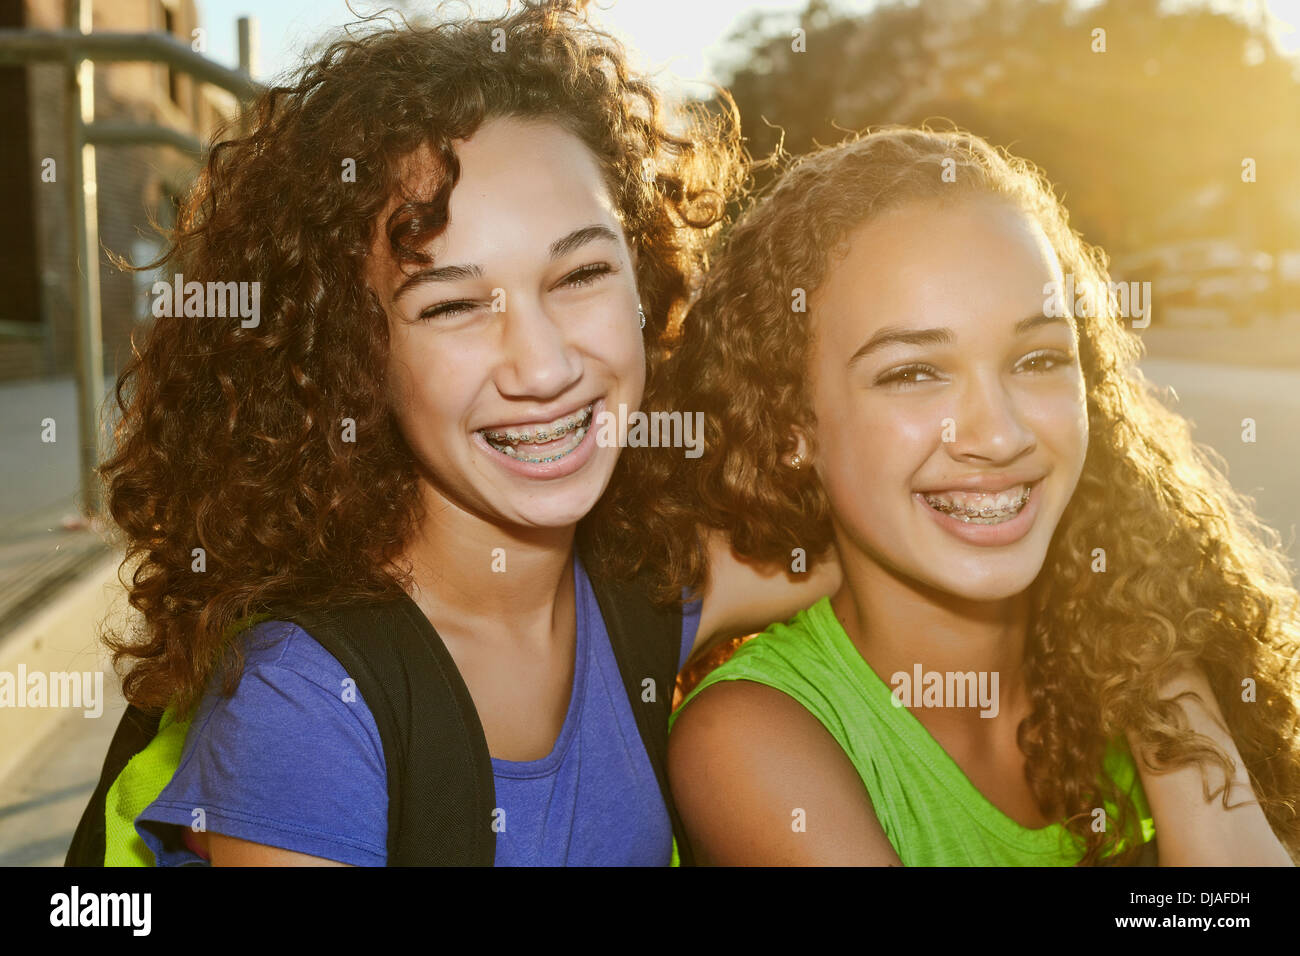 Mixed Race girls smiling Banque D'Images